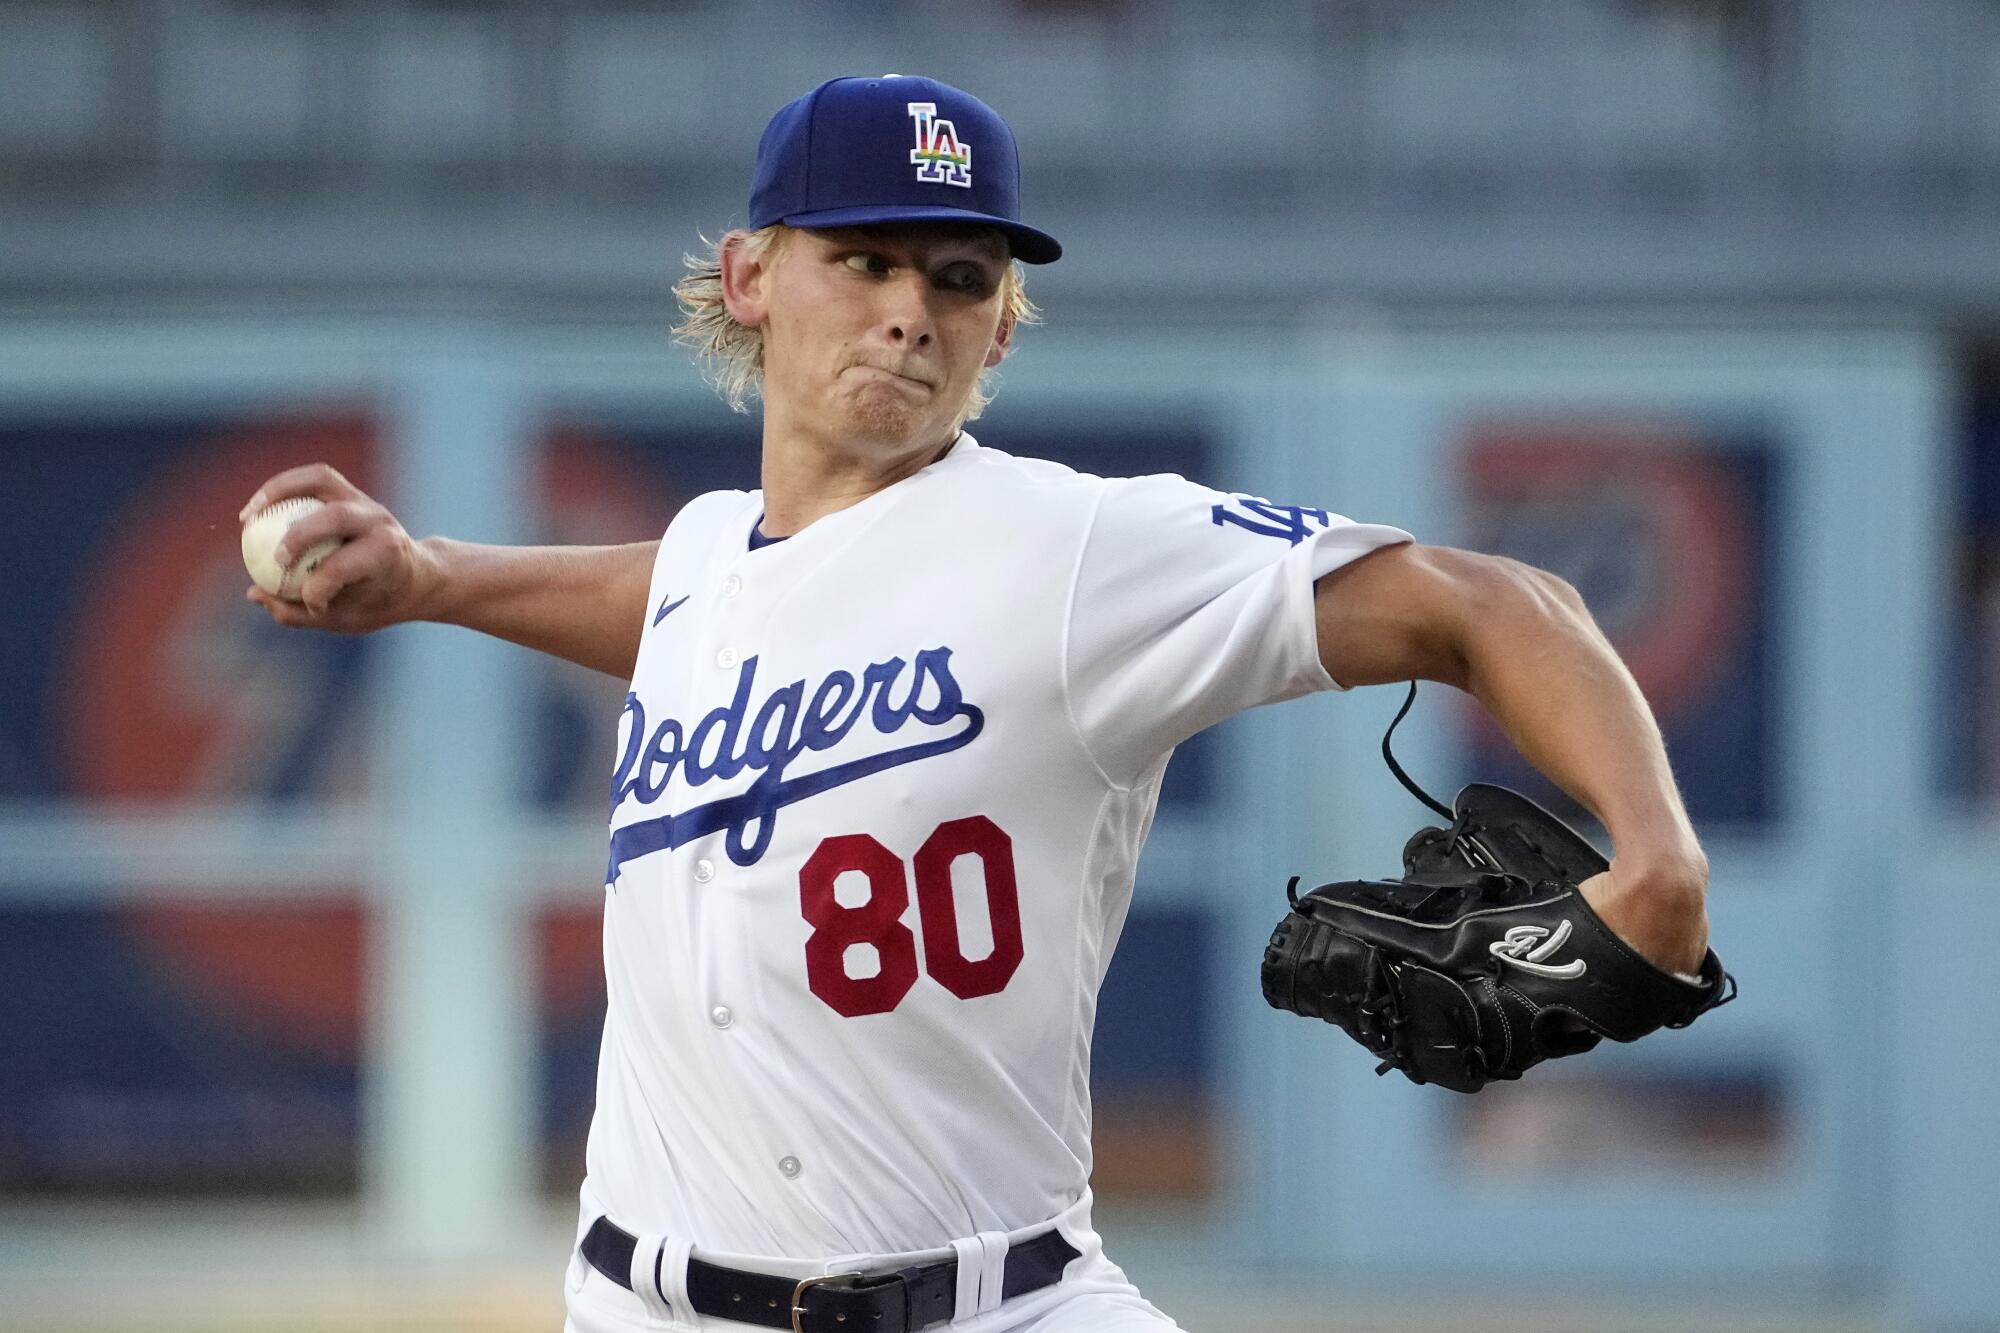 Dodgers lose to Giants in 11th after rookie's no-hit debut - Los